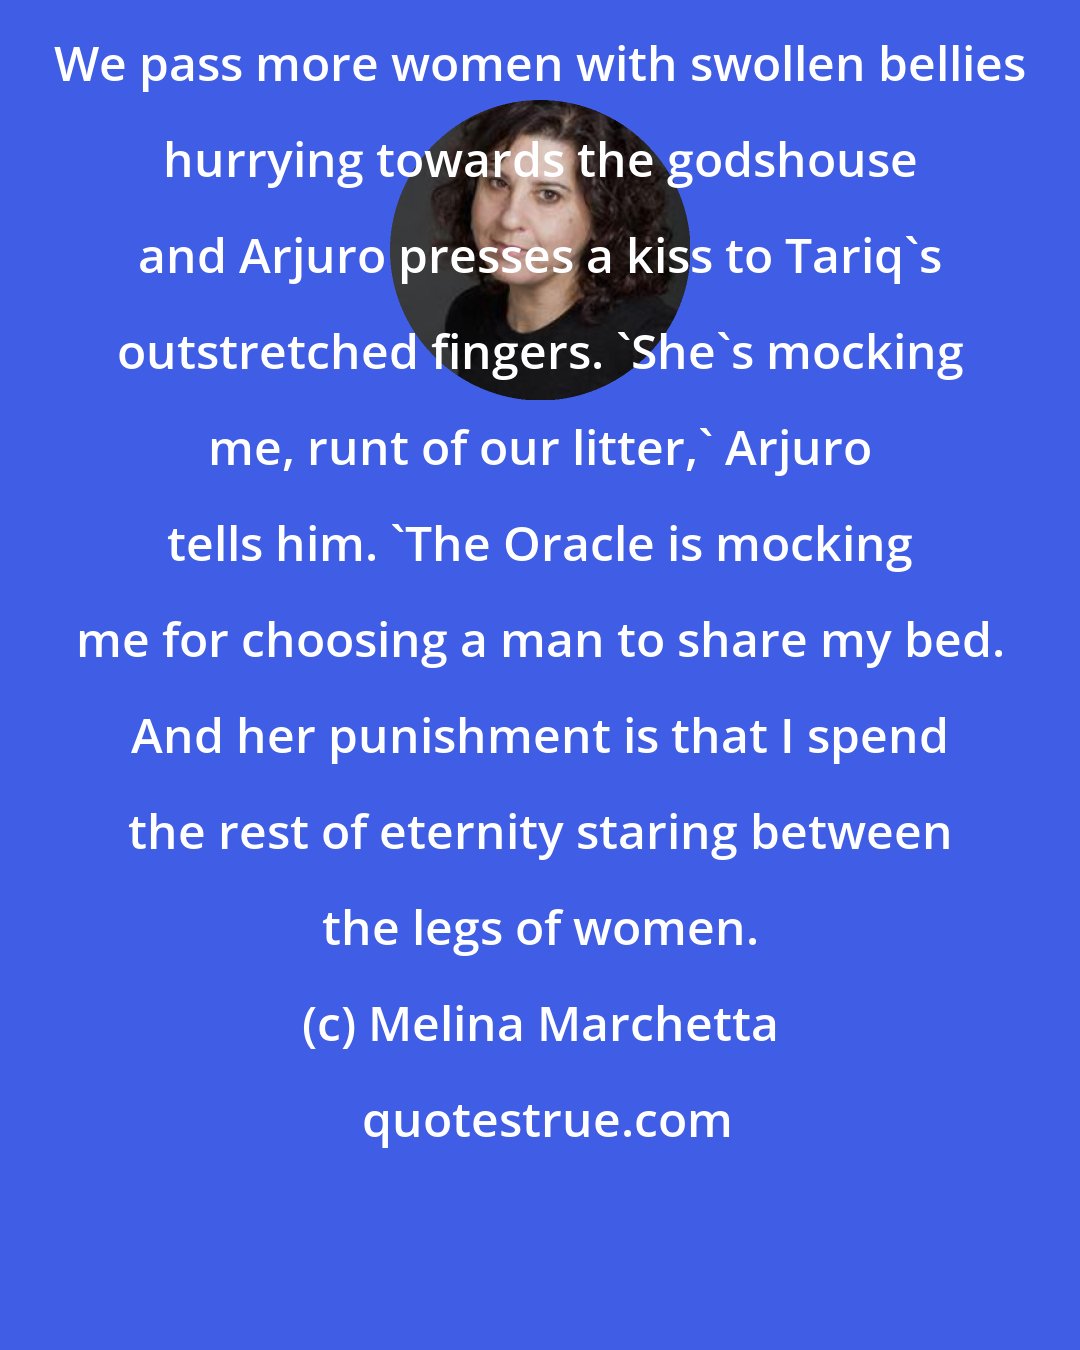 Melina Marchetta: We pass more women with swollen bellies hurrying towards the godshouse and Arjuro presses a kiss to Tariq's outstretched fingers. 'She's mocking me, runt of our litter,' Arjuro tells him. 'The Oracle is mocking me for choosing a man to share my bed. And her punishment is that I spend the rest of eternity staring between the legs of women.